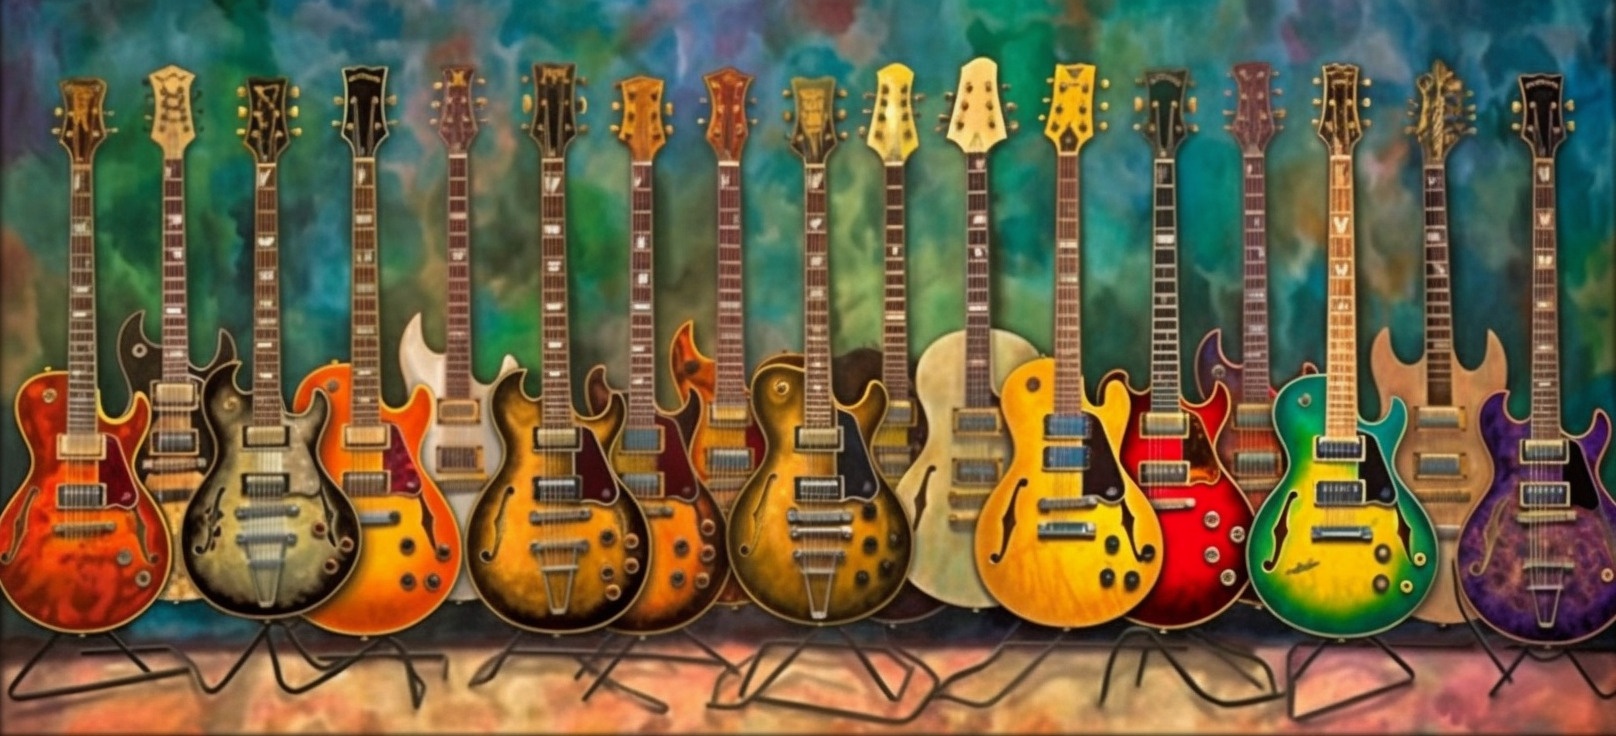 guitar collection on stands dozens